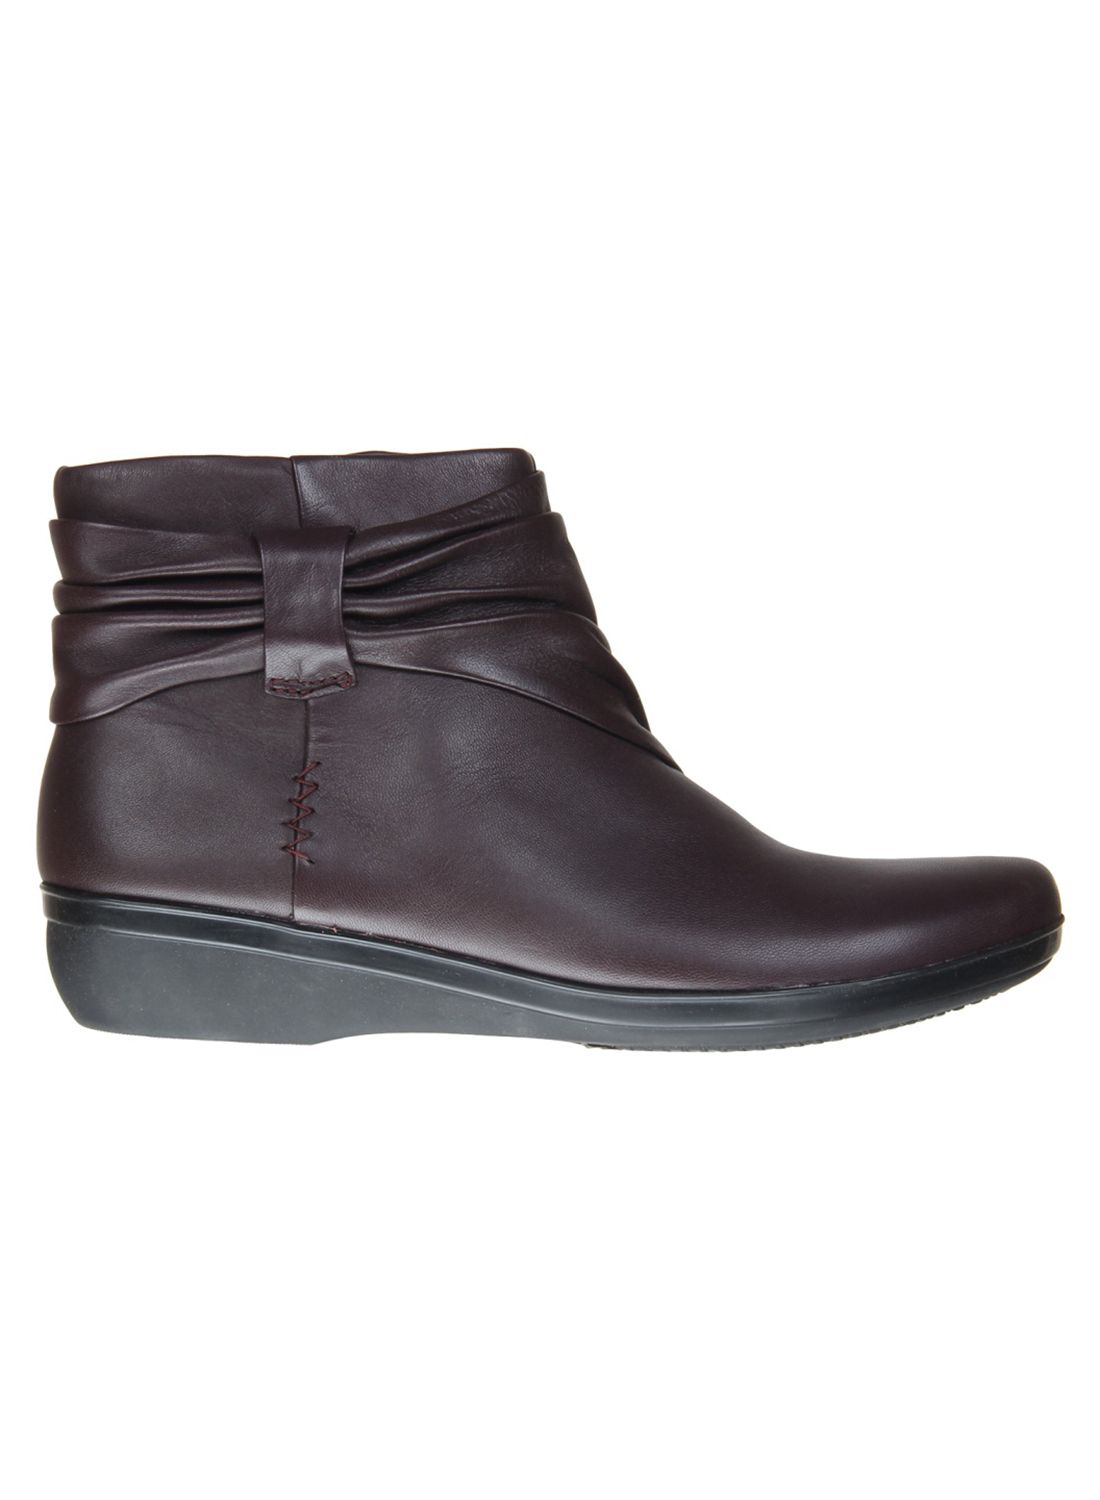 Clarks Purple Ankle Length Bootie Boots Price in India- Buy Clarks ...